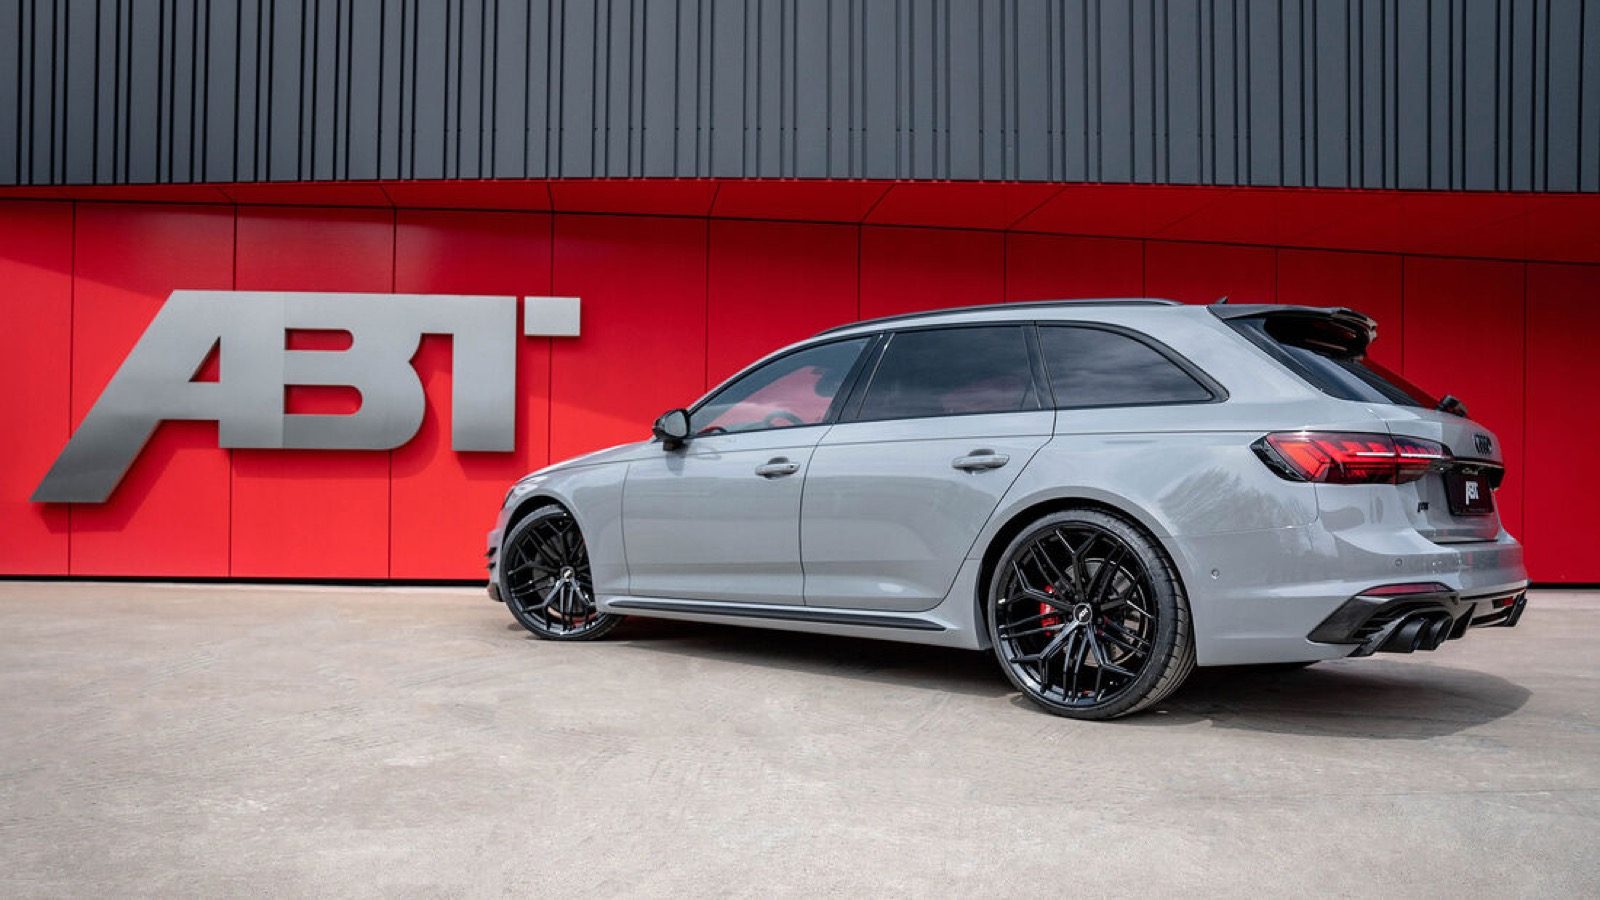 RS4-X